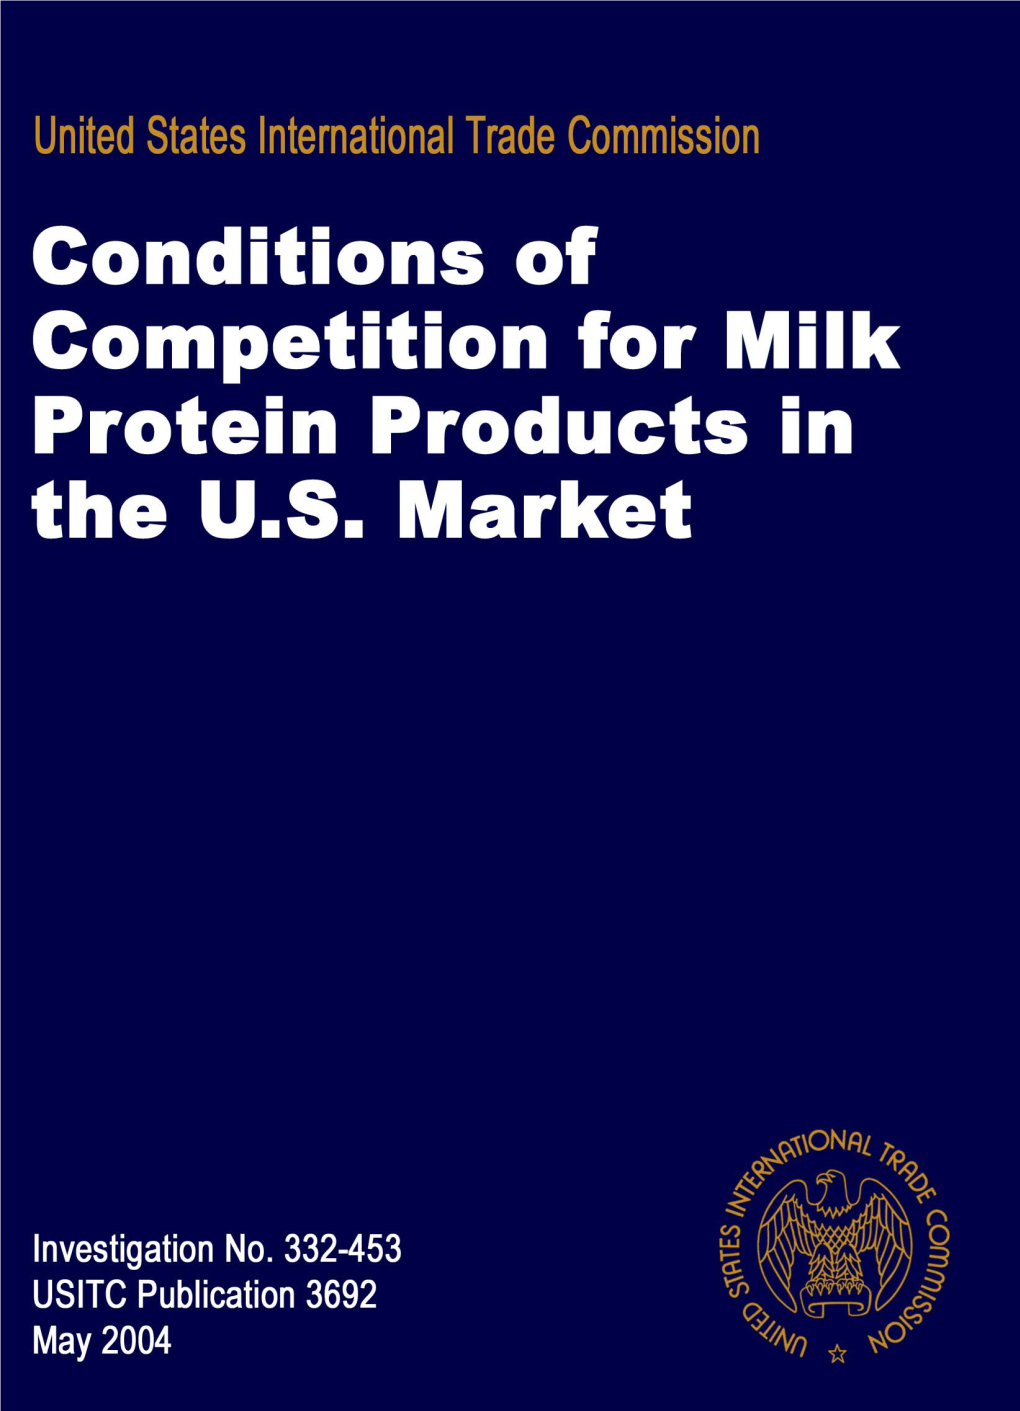 Conditions of Competition for Milk Protein Products in the U.S. Market